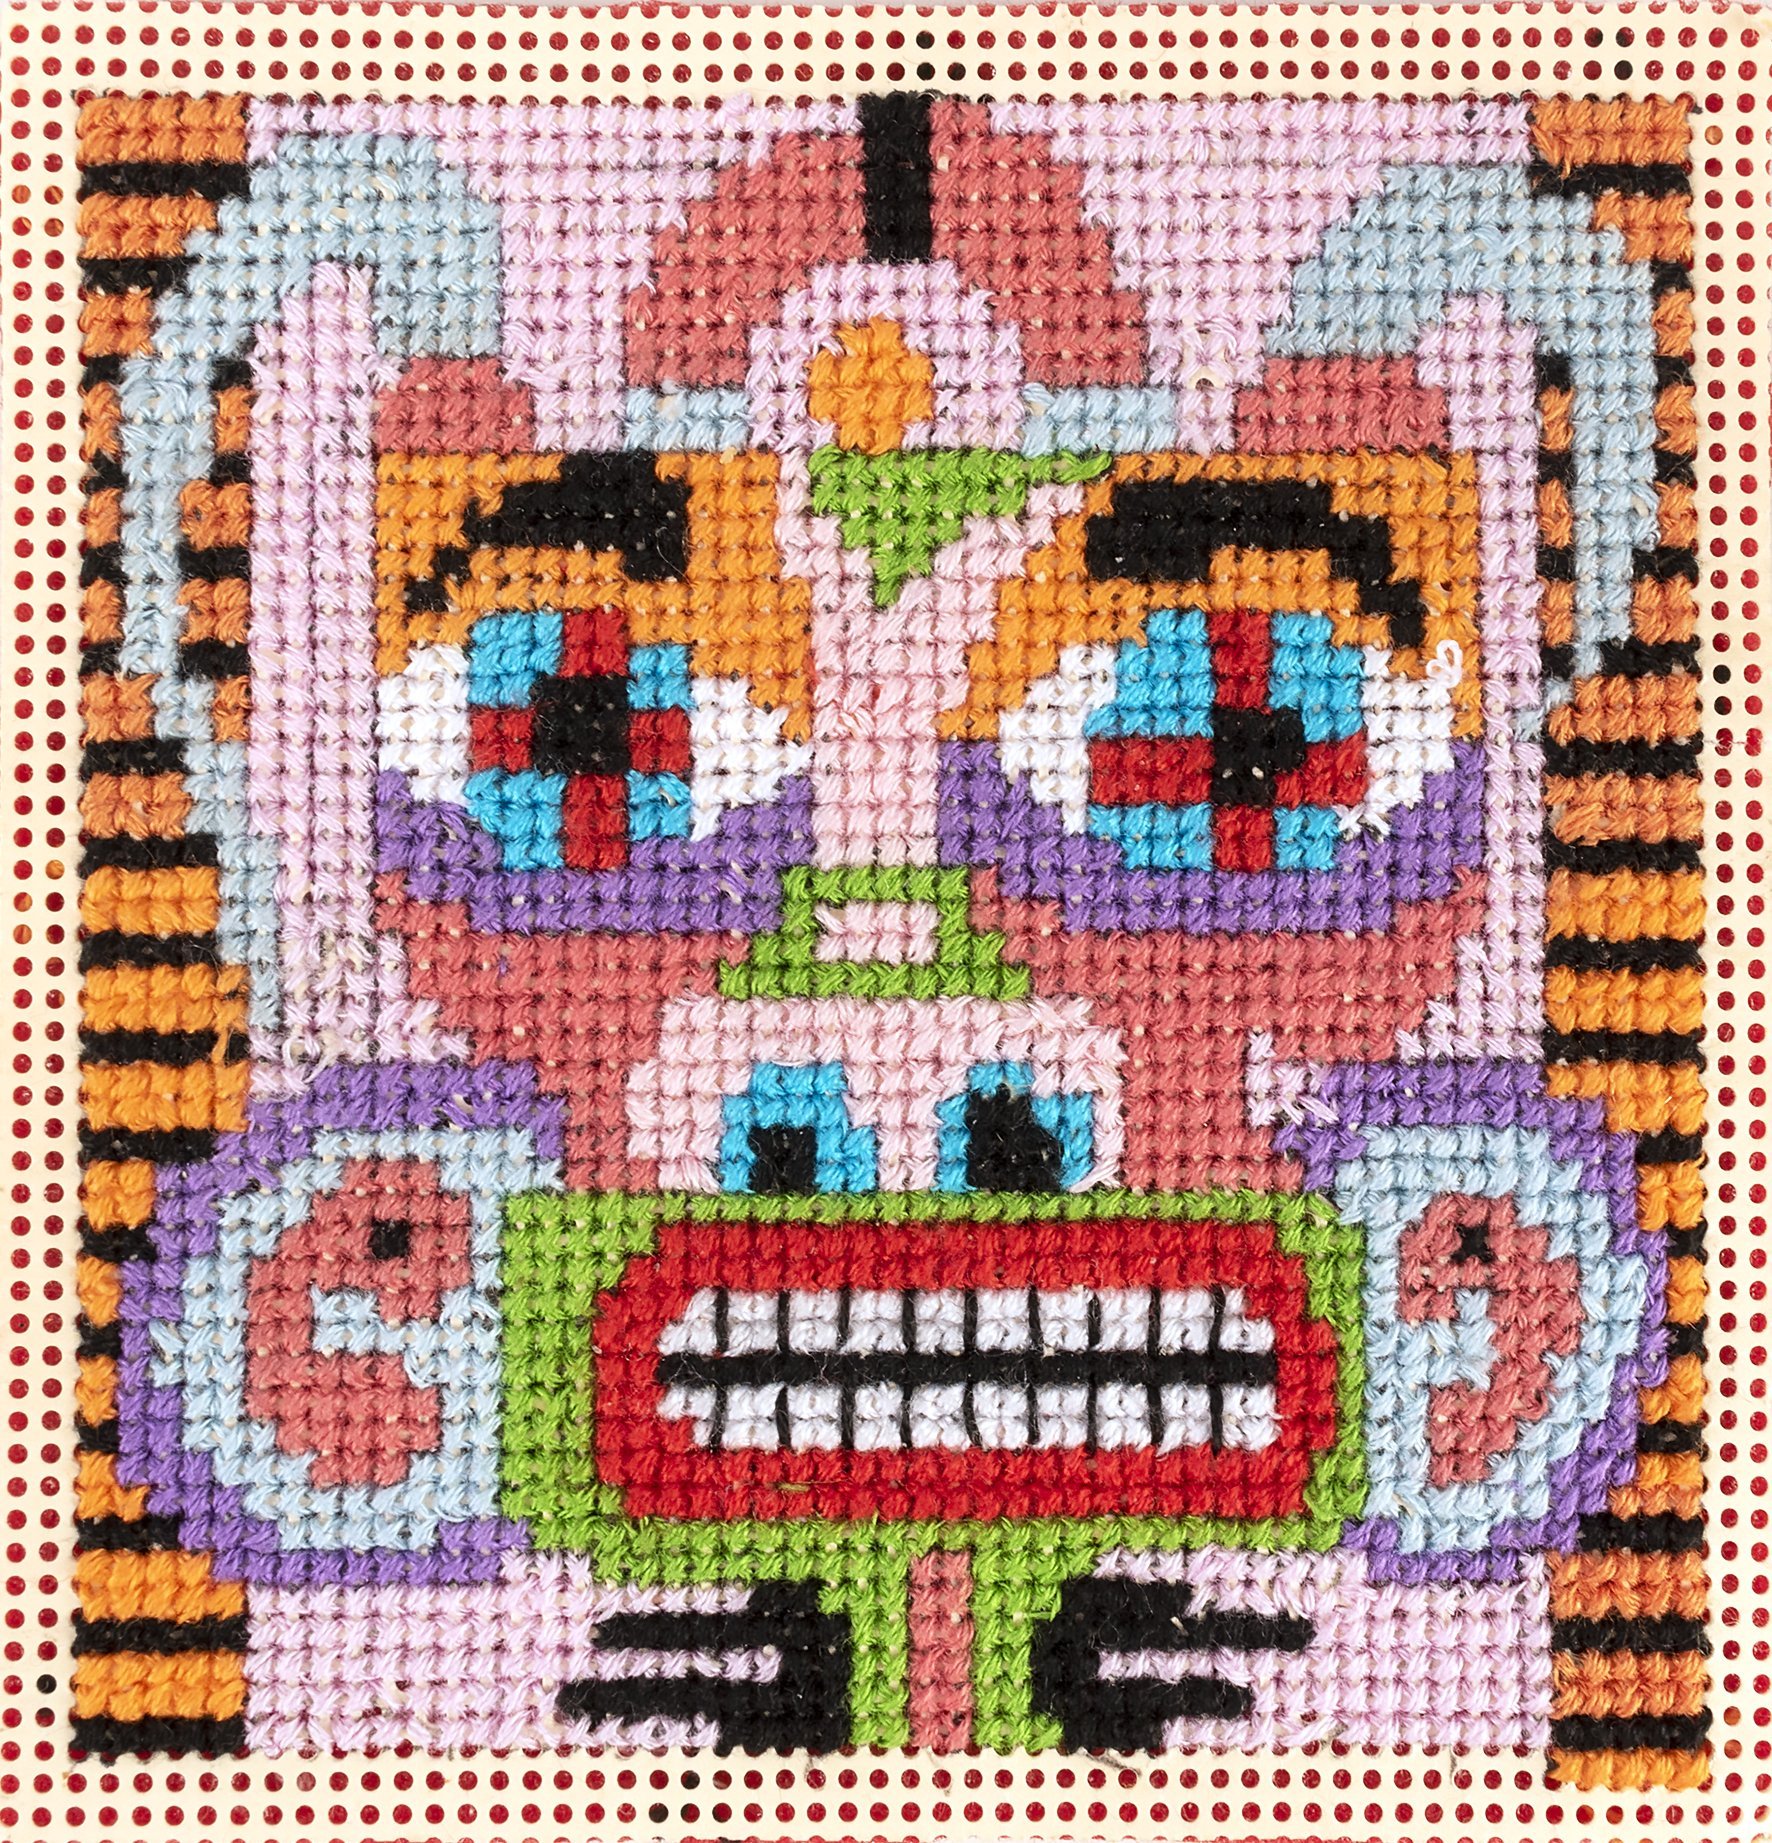   Valerie Potter, Untitled (VP55), 2020, Cross stitch, 10.5x10.5cm, 4.1x4.1 inches. Photo by Ellie Walmsley  